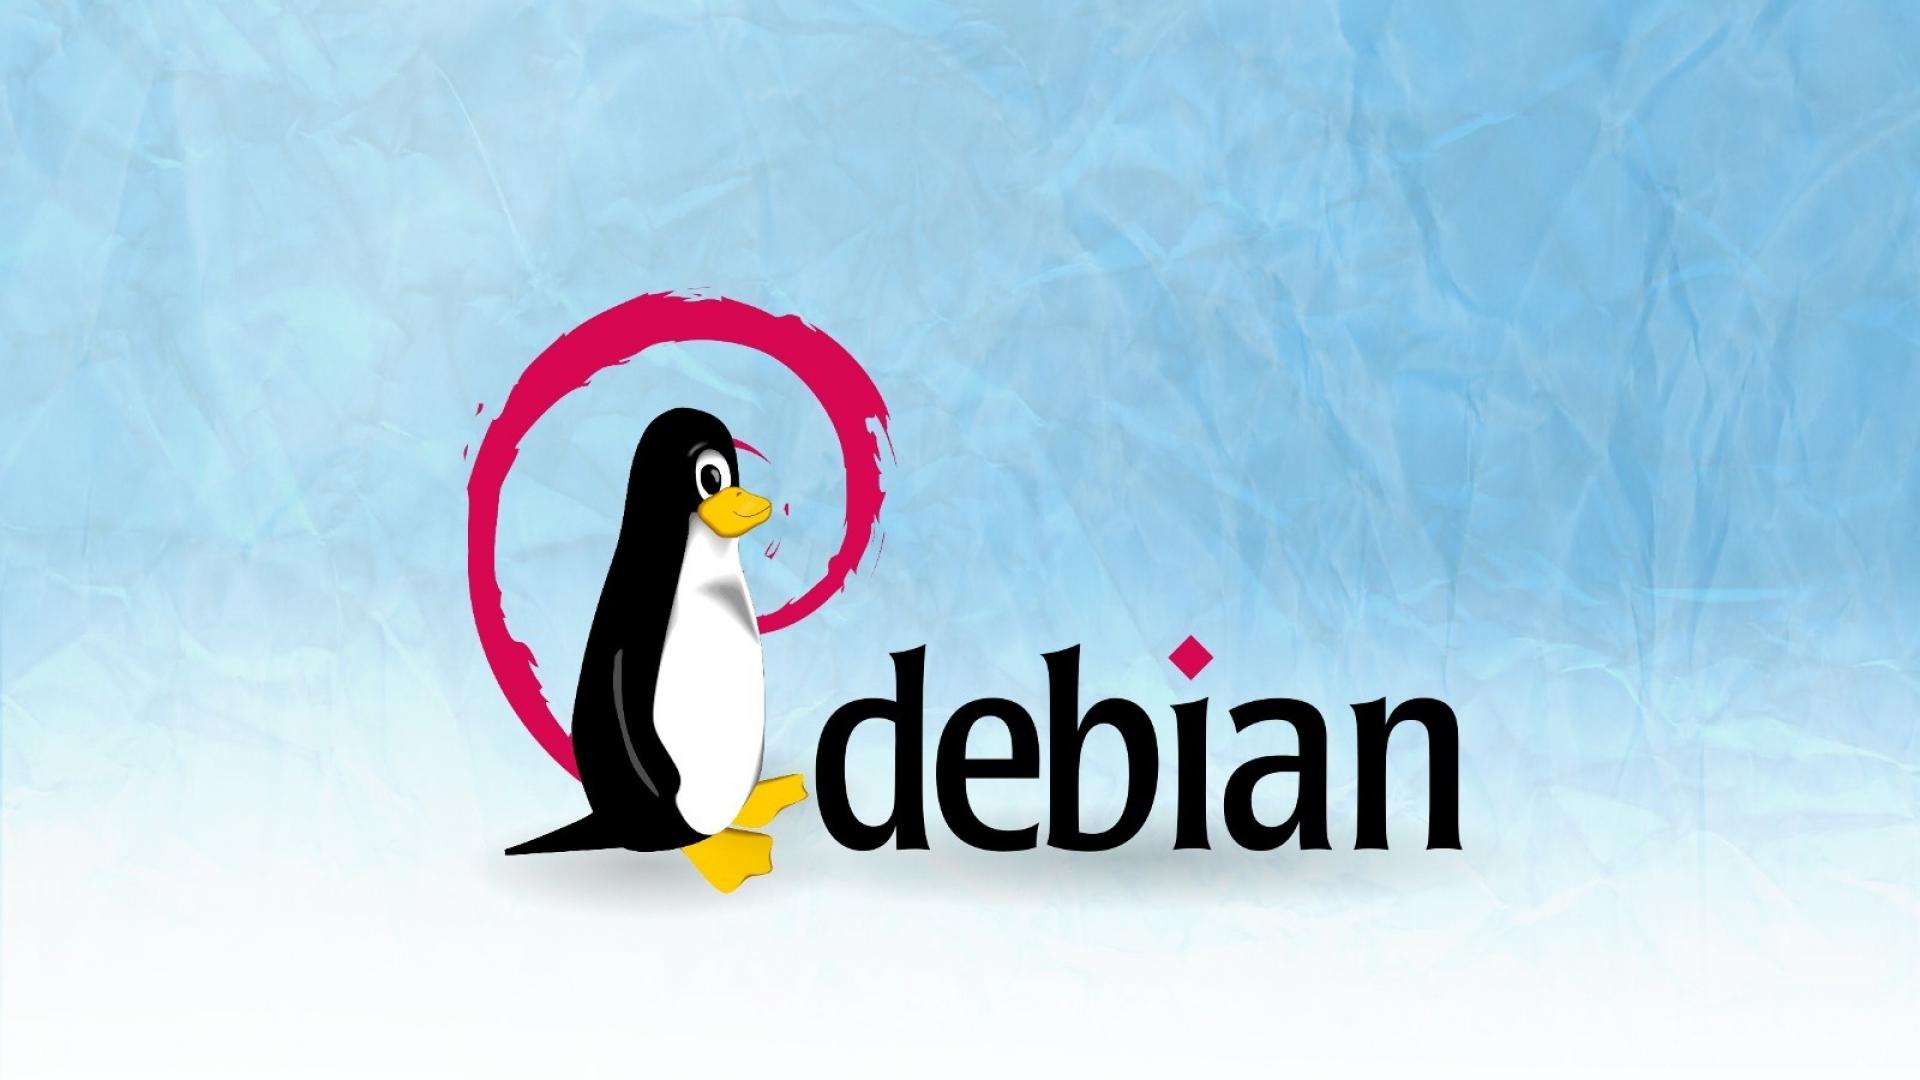 GNU Linux Debian – security-tracker.debian.org tracker status release stable – semi-manual system update method vs full automatic updates – apt can do https now: update /etc/apt/sources.list http -> https